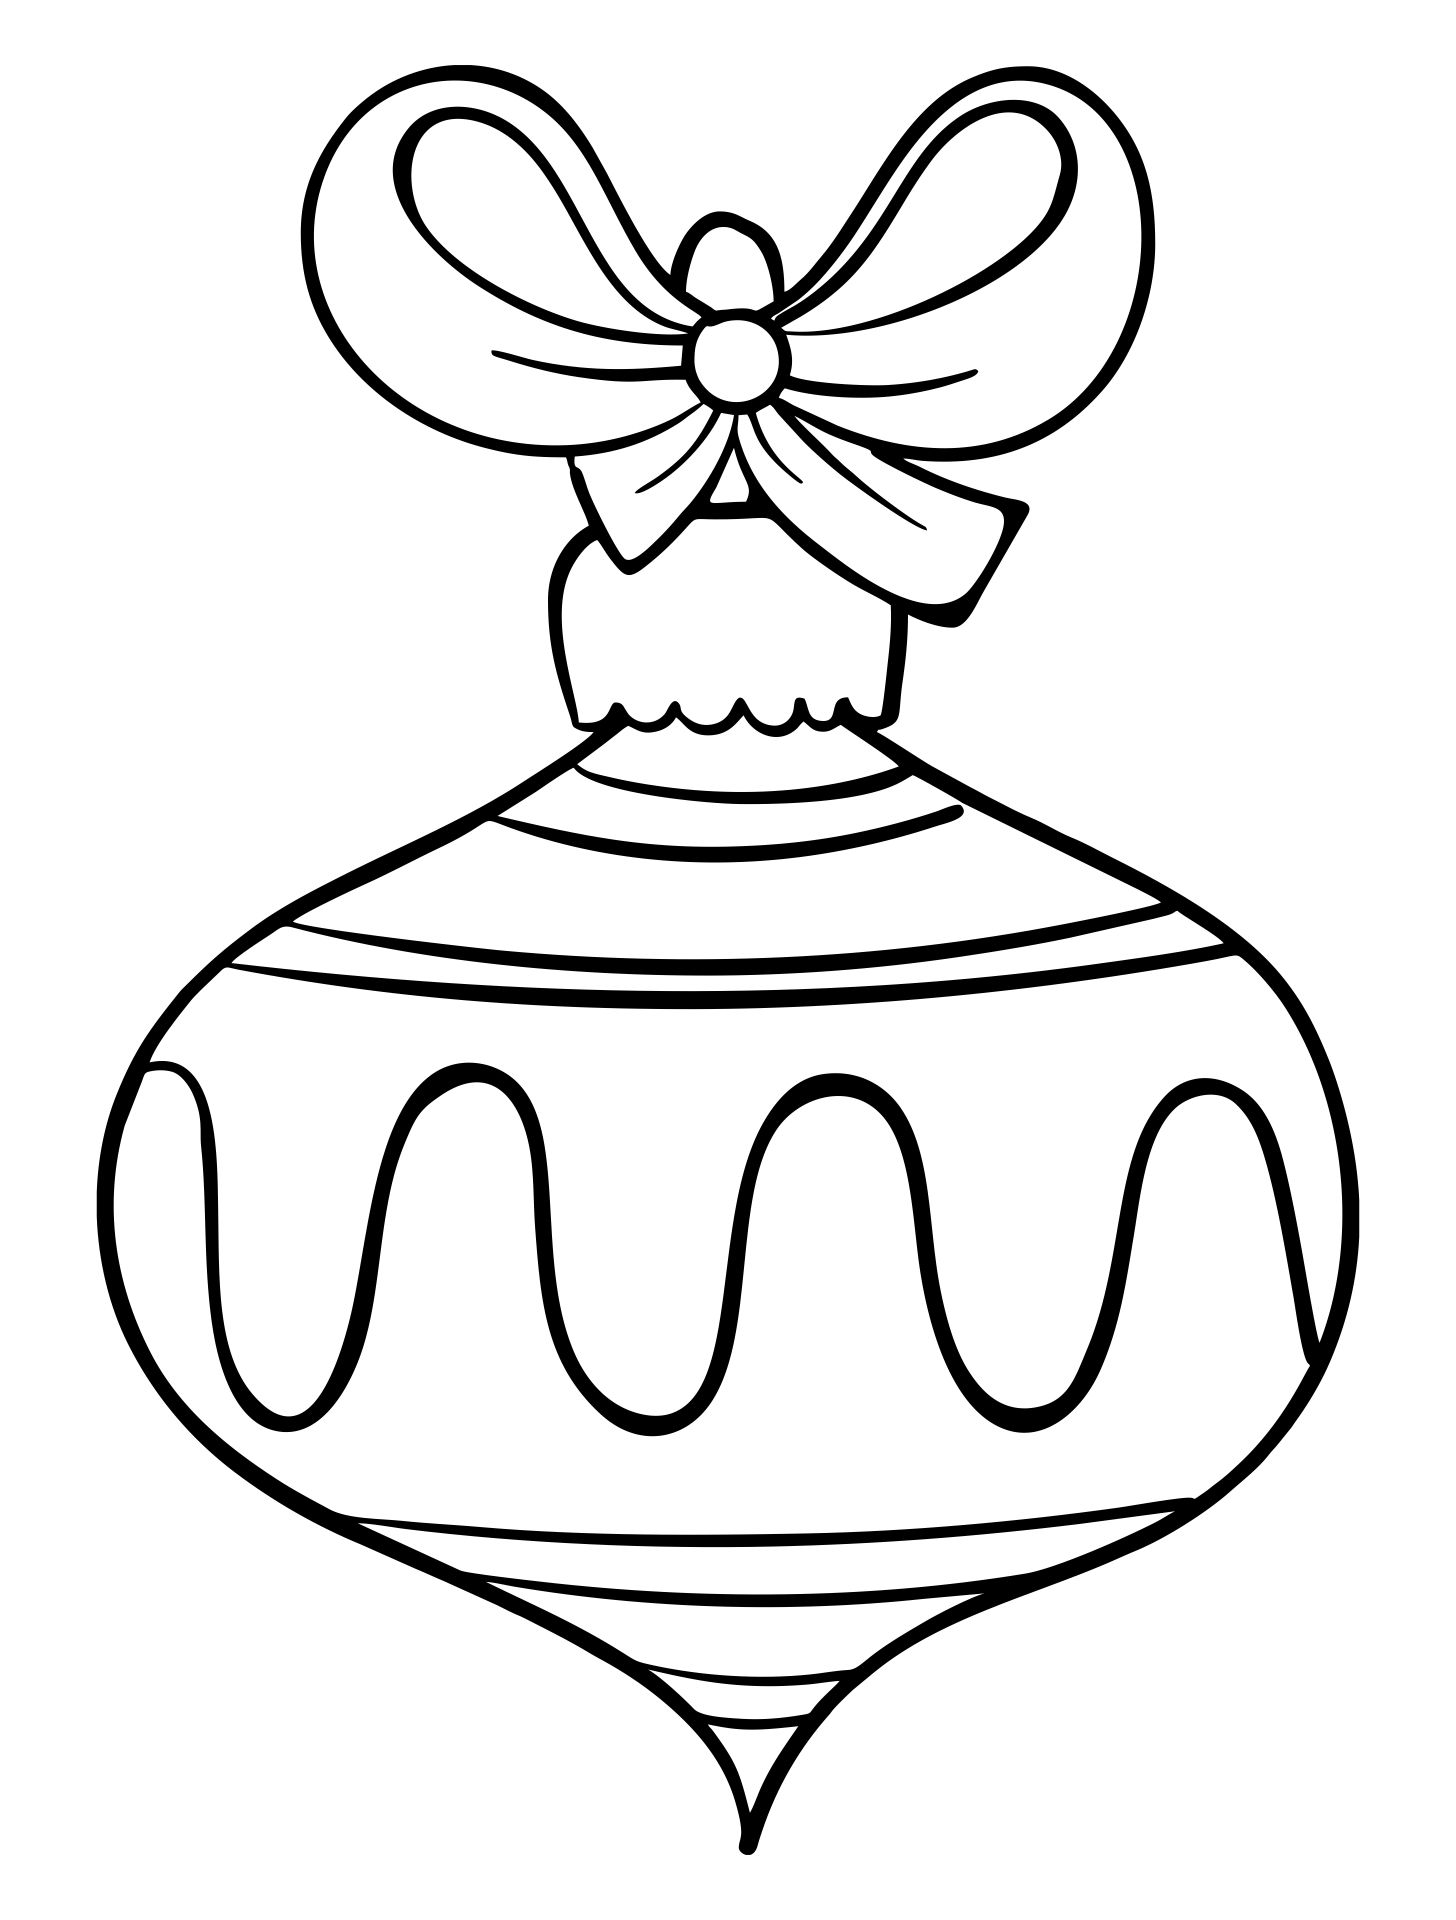 15-best-free-christmas-printable-ornament-coloring-pages-printablee